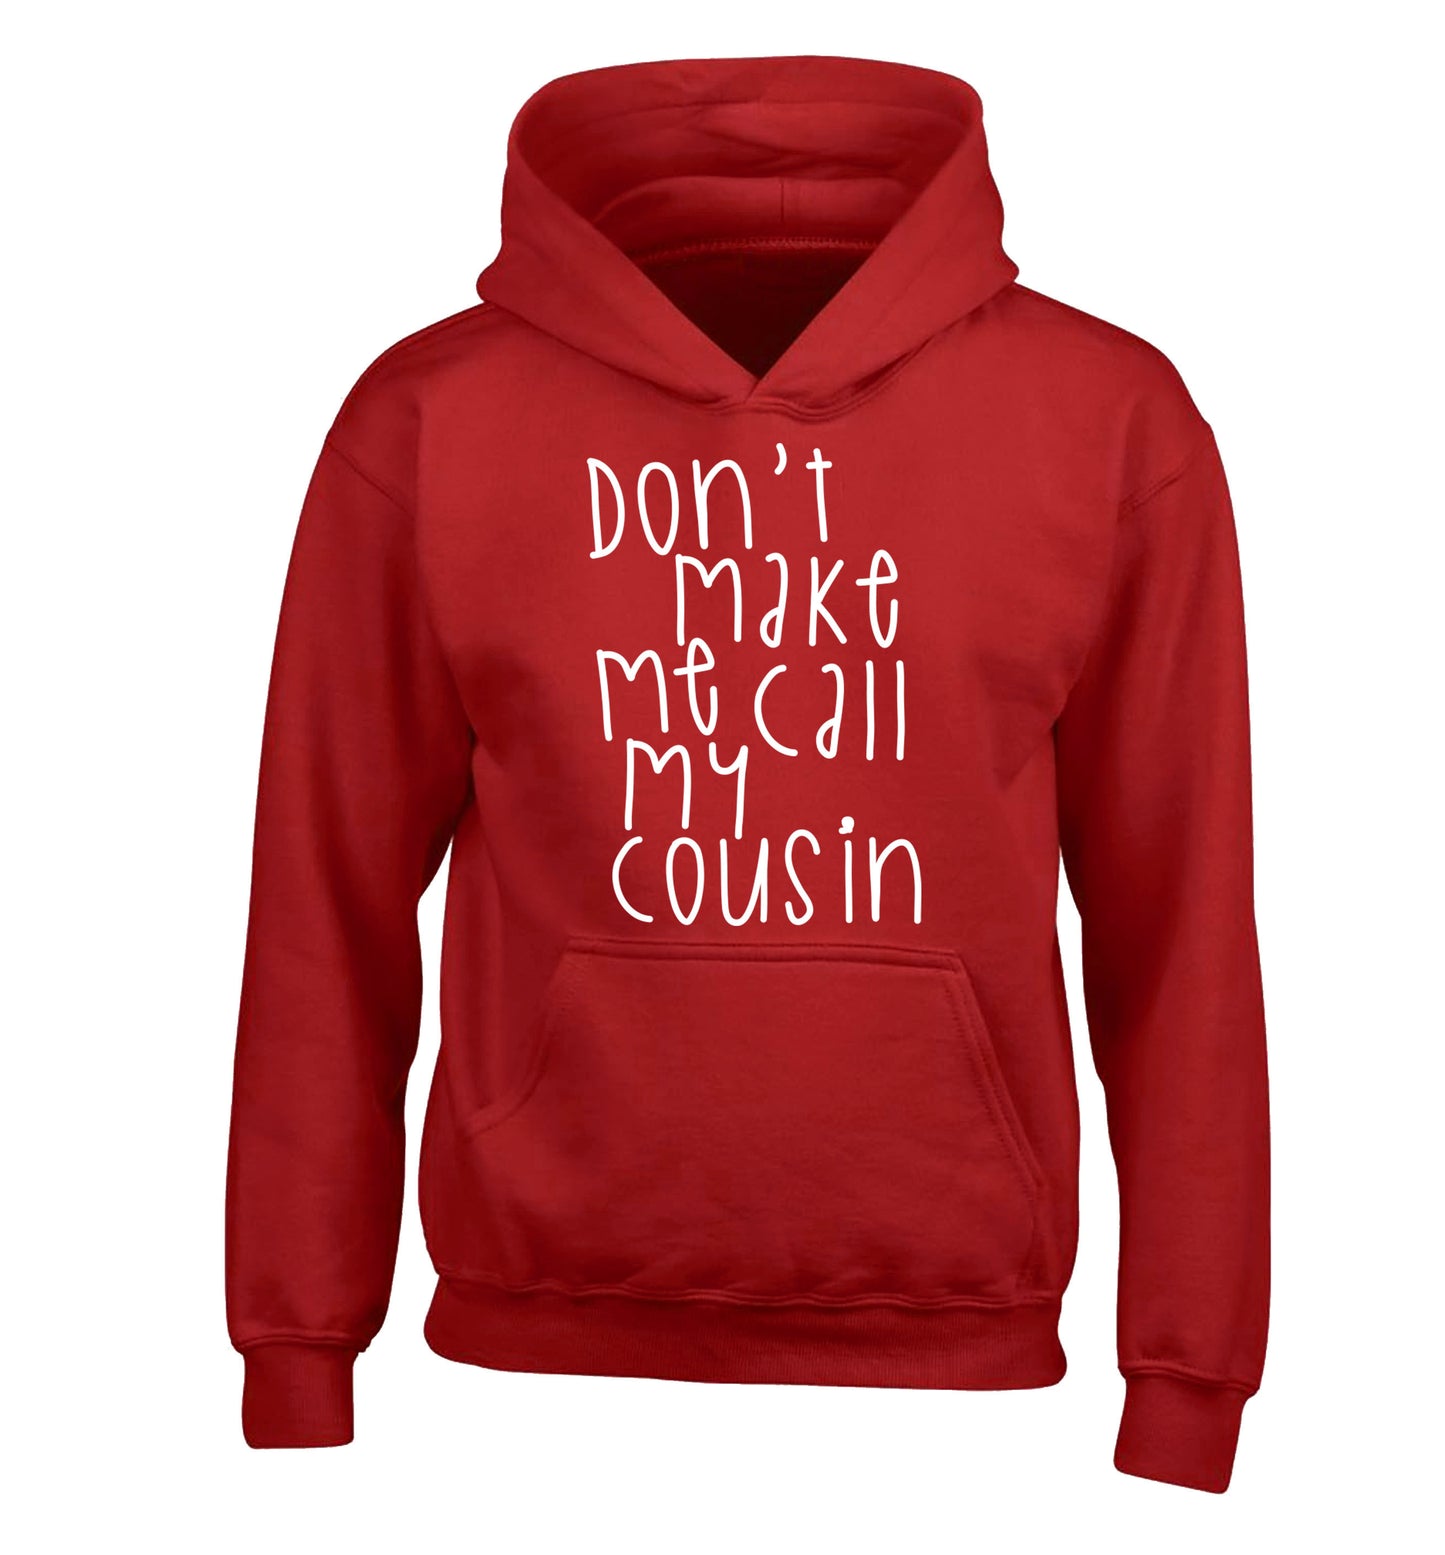 Don't make me call my cousin children's red hoodie 12-14 Years